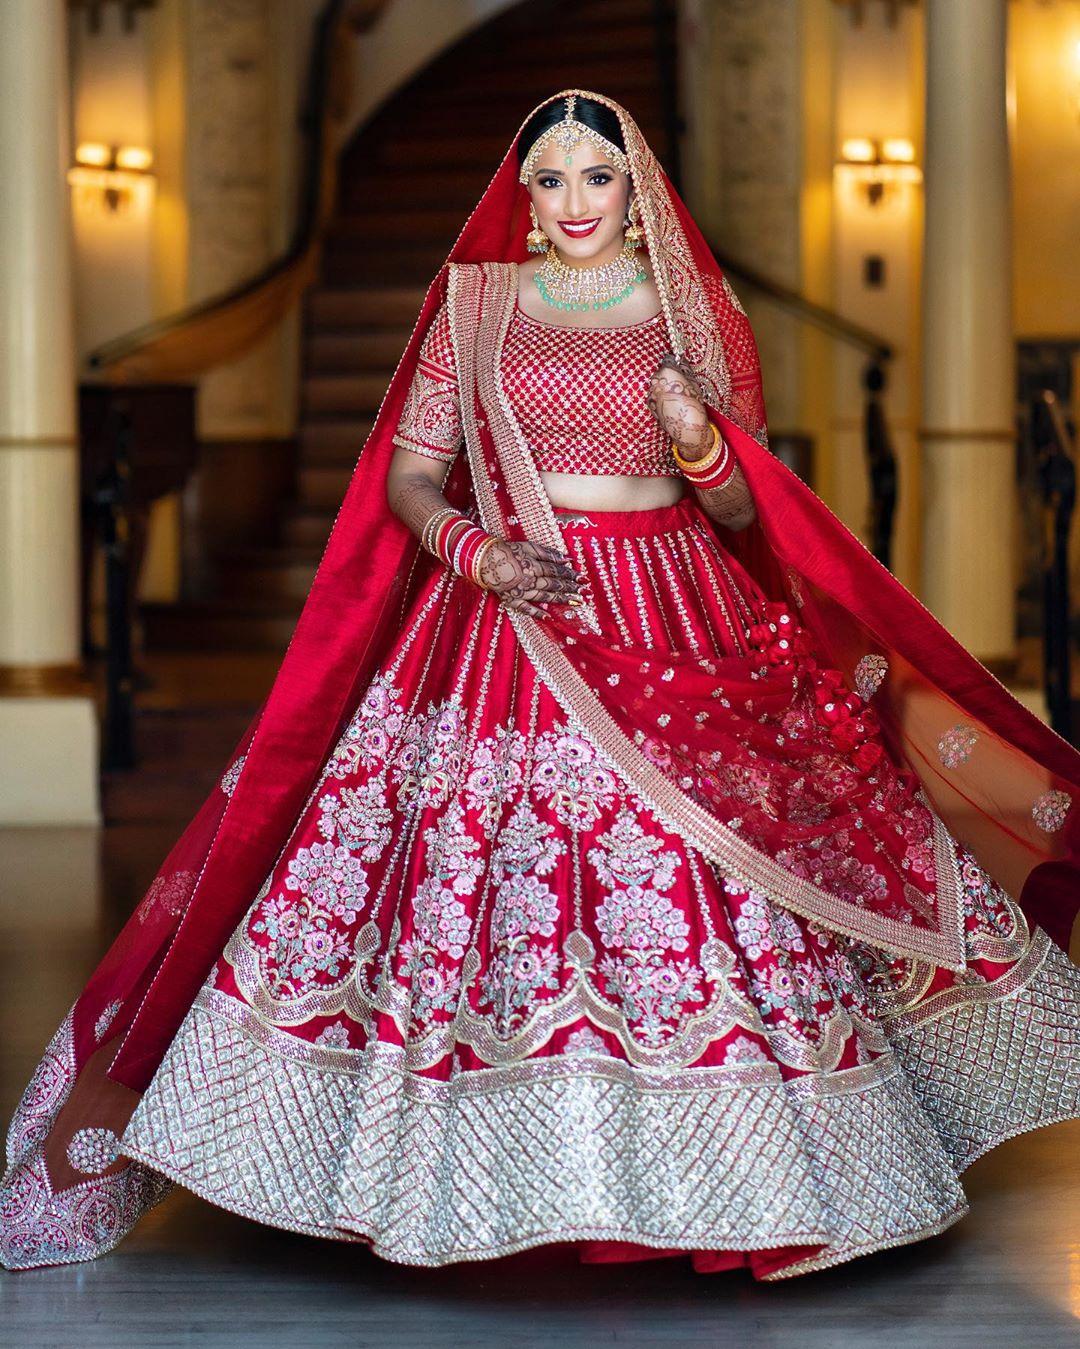 A Grand Mumbai Wedding With A Bride In Stunning Outfits | WedMeGood